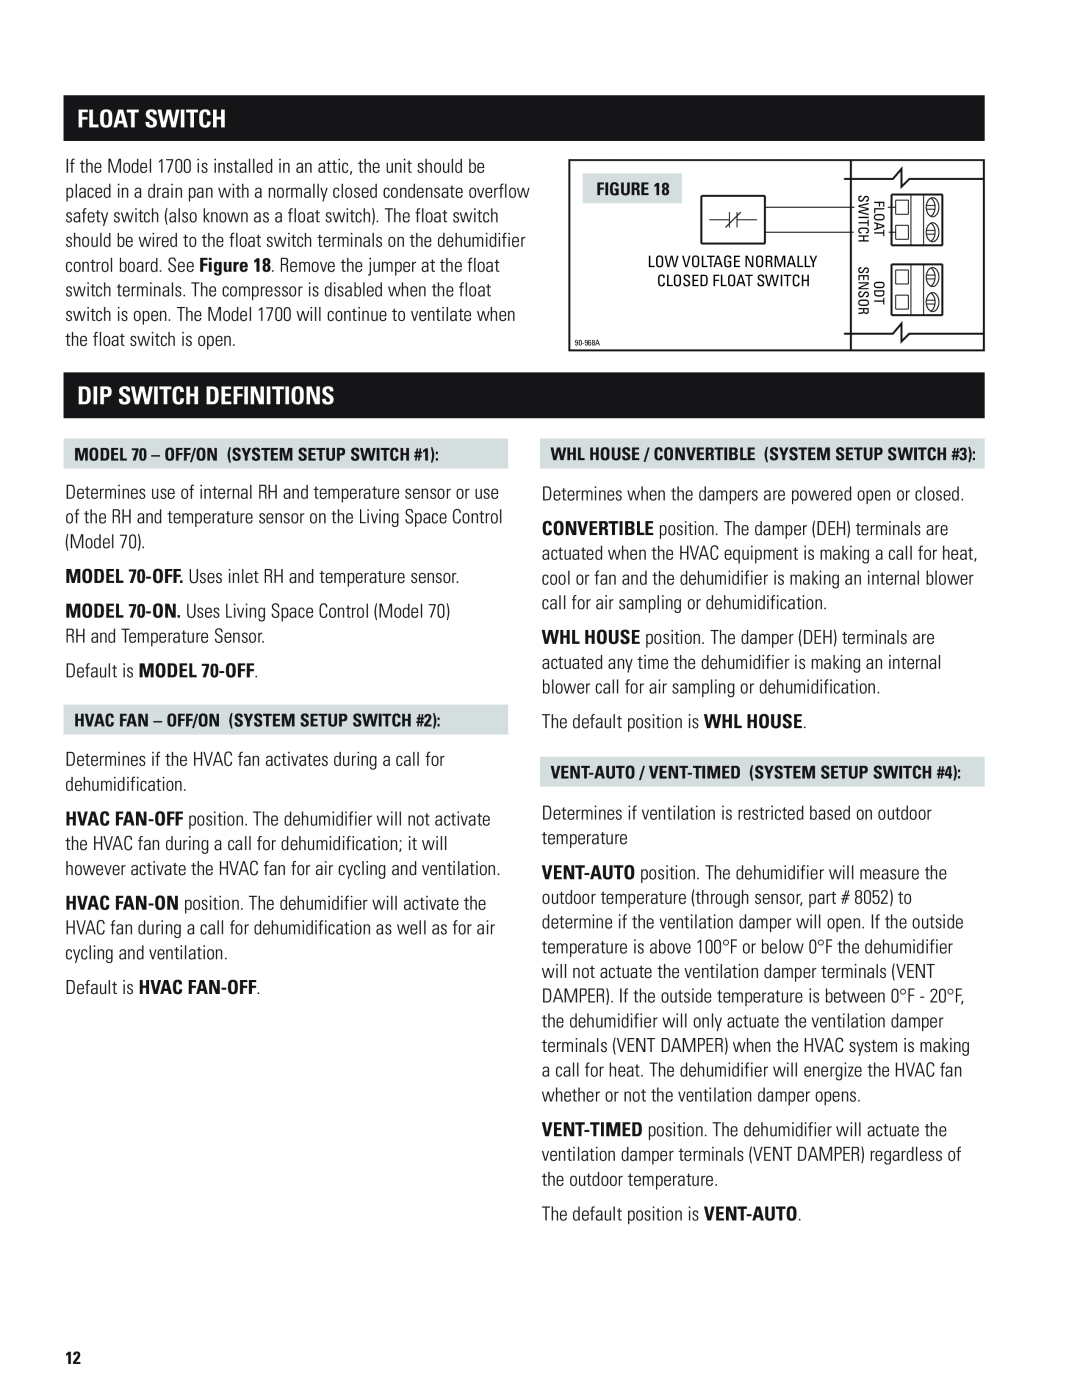 Aprilaire 1700 installation instructions Float Switch, Dip Switch Definitions 